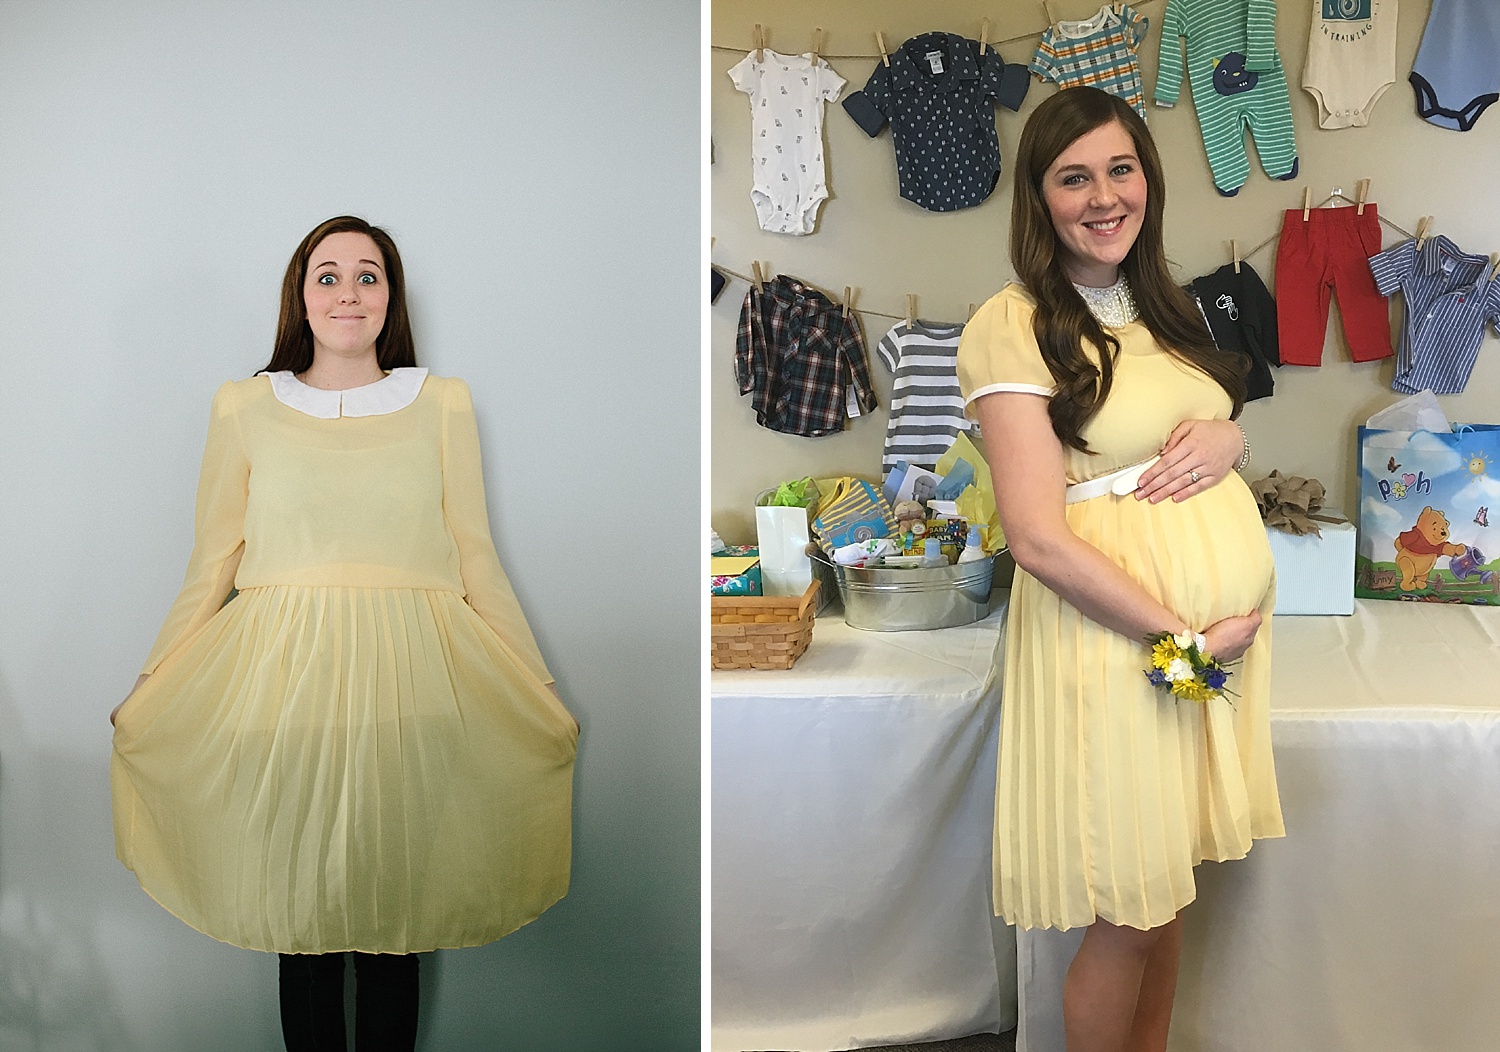 Full Size of Baby Shower:maternity Boutique Cute Maternity Dresses For Baby Shower Affordable Maternity Dresses For Baby Shower What To Wear To My Baby Shower Mom And Dad Baby Shower Outfits Used Maternity Clothes Cute Inexpensive Maternity Clothes Baby Shower Dresses For Winter